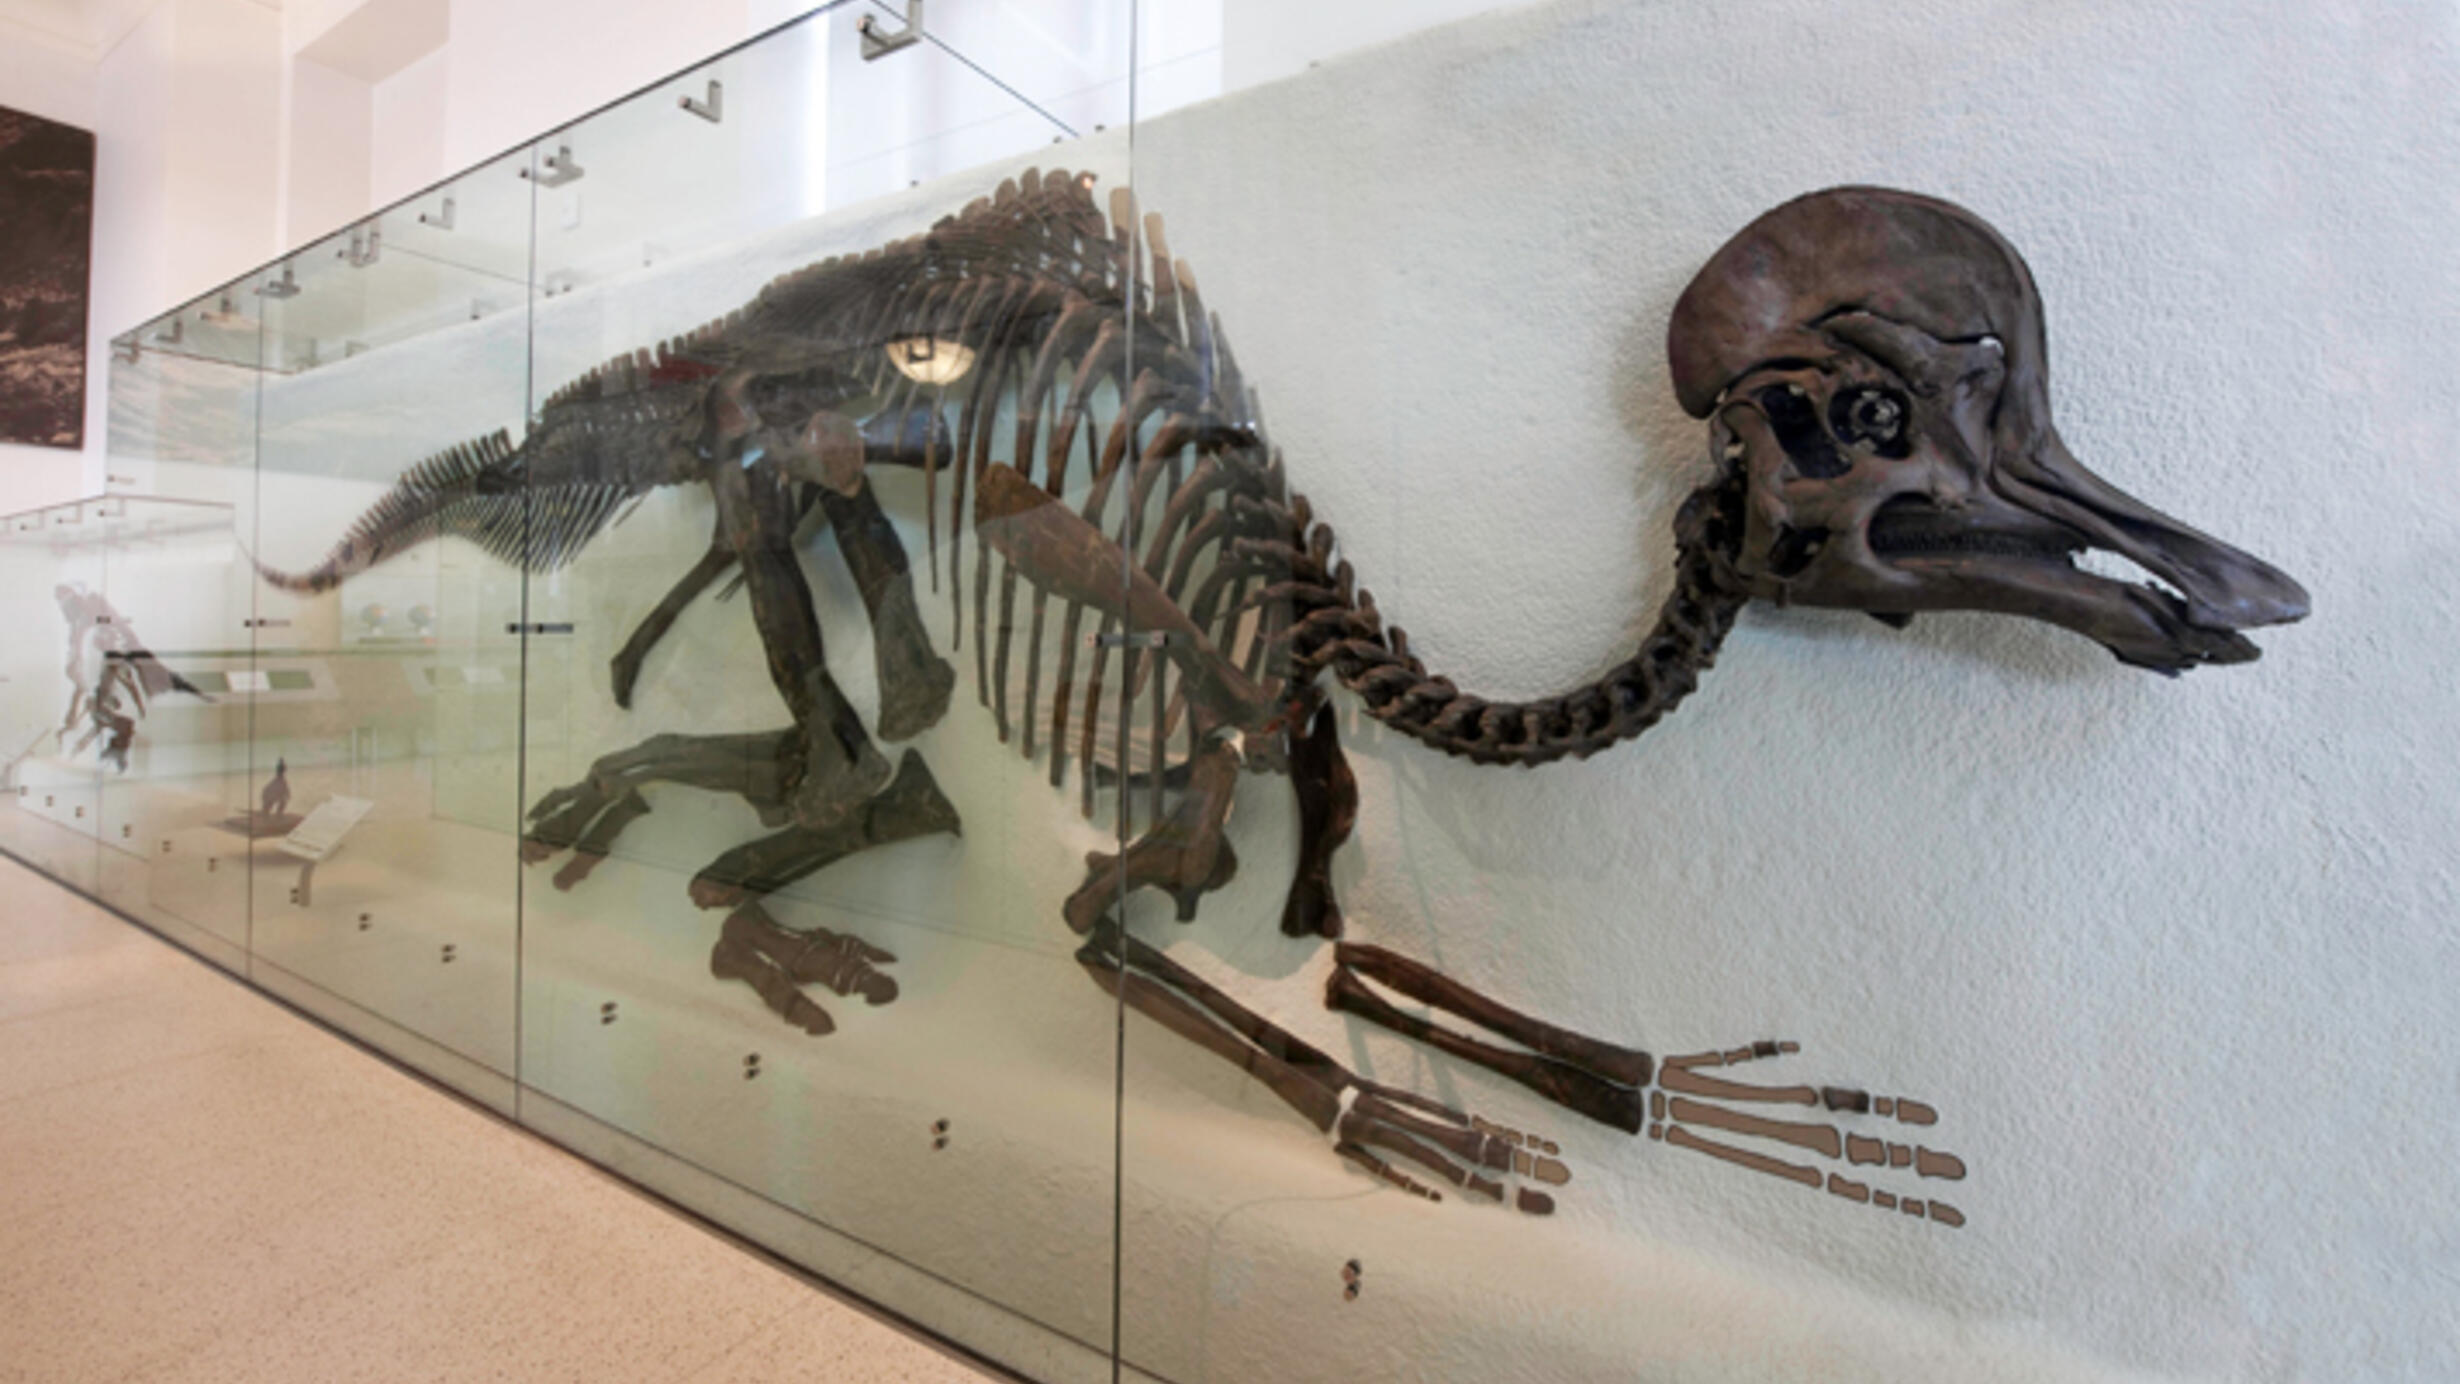 A fossil skeleton of a Corythosaurus shown mounted against a white wall. It has a round helmet-like skull. Several digits are missing from its front limbs and are represented by painted restorations on the wall.